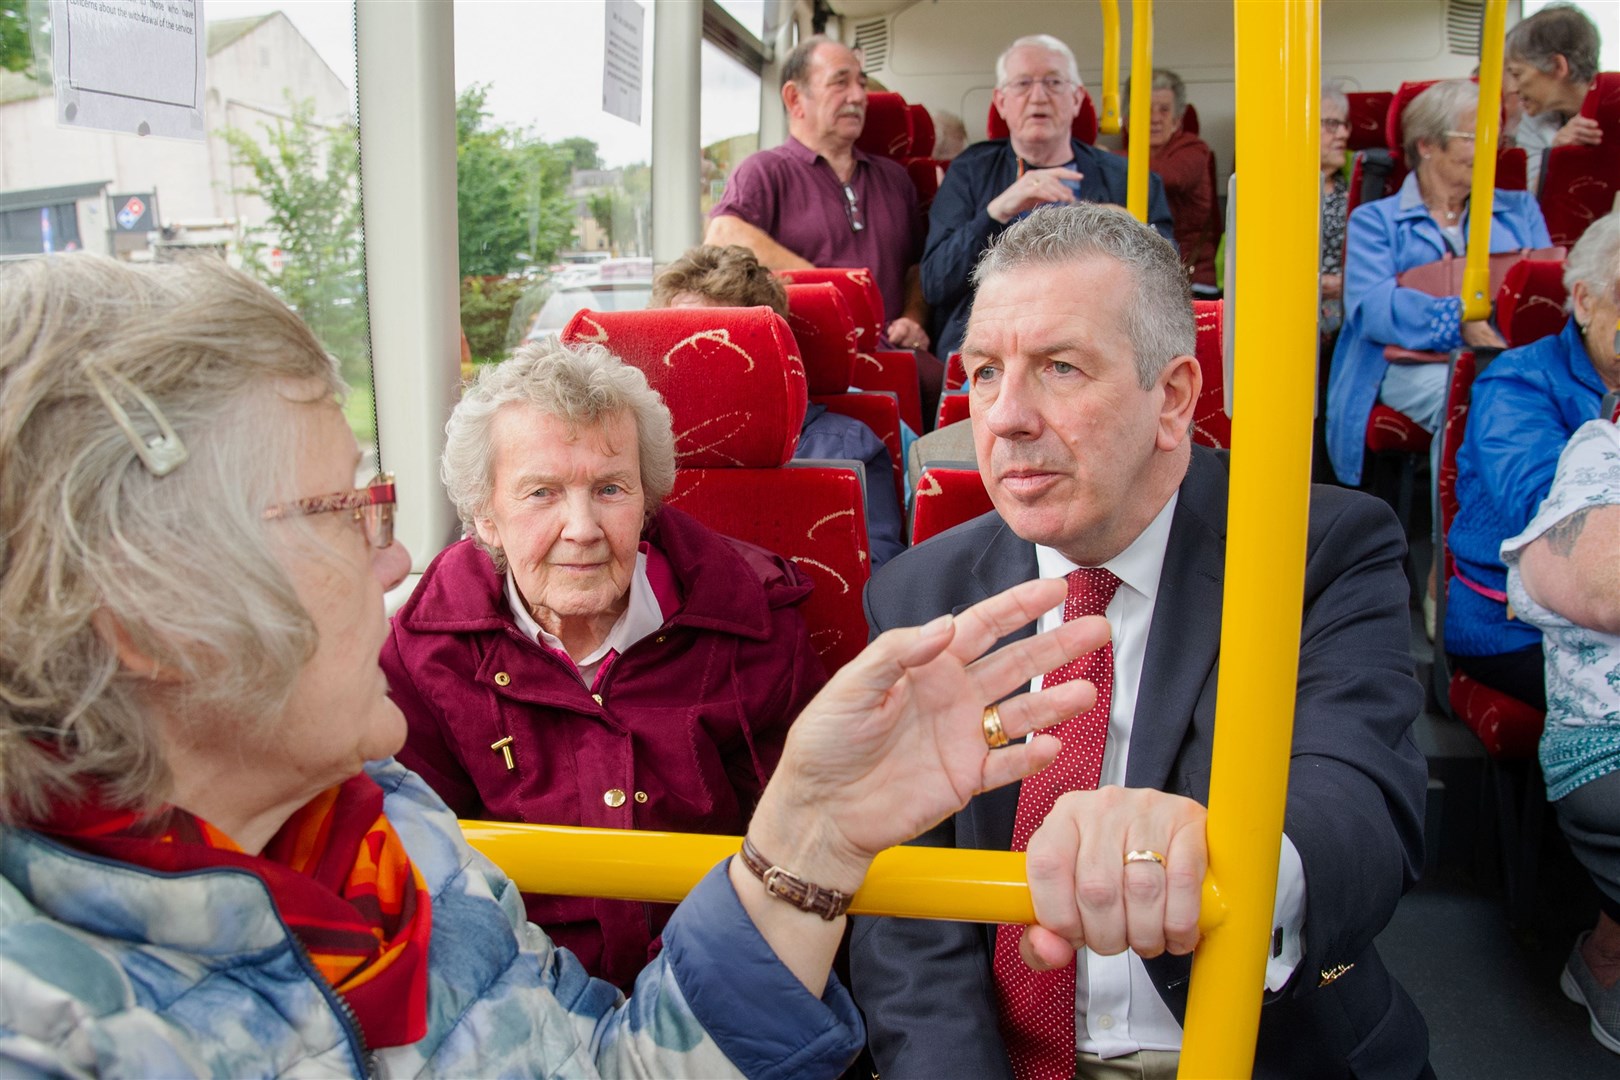 David Stewart, Highlands and Islands Labour MSP, chats to regular bus users. Picture: Daniel Forsyth. Image No.044604.